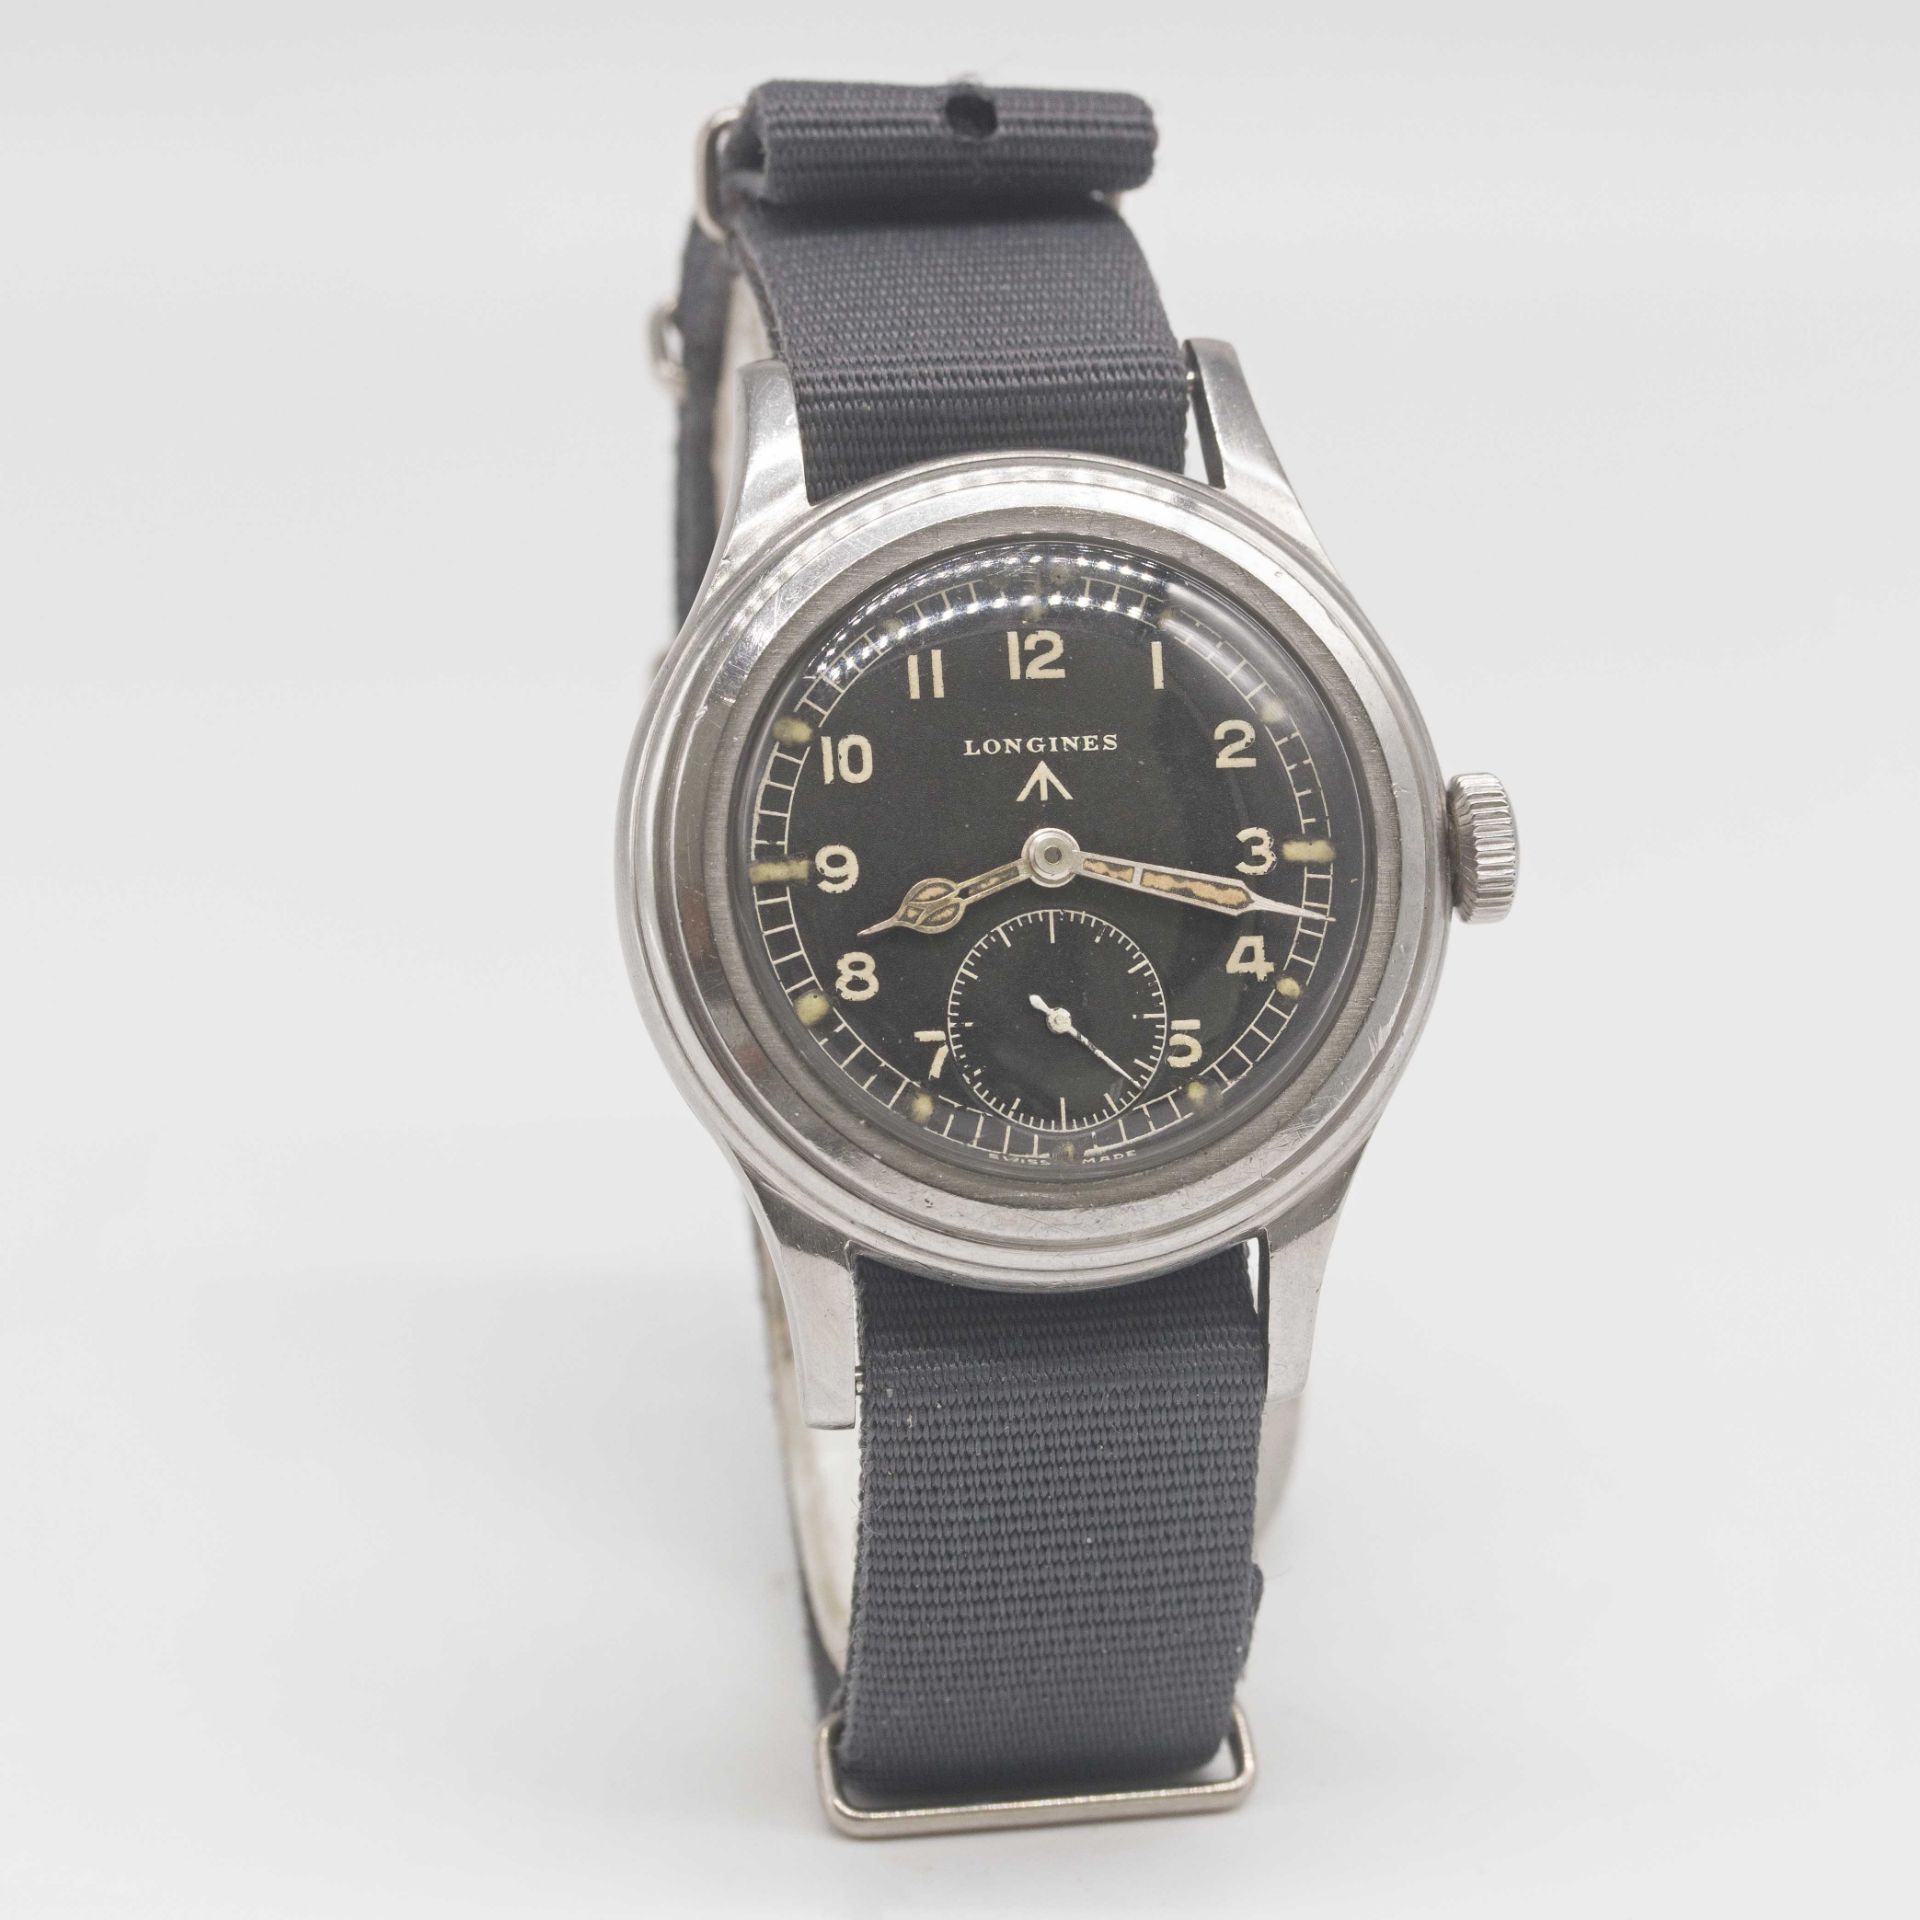 A GENTLEMAN'S STAINLESS STEEL BRITISH MILITARY LONGINES W.W.W. WRIST WATCH CIRCA 1945, PART OF - Image 4 of 9